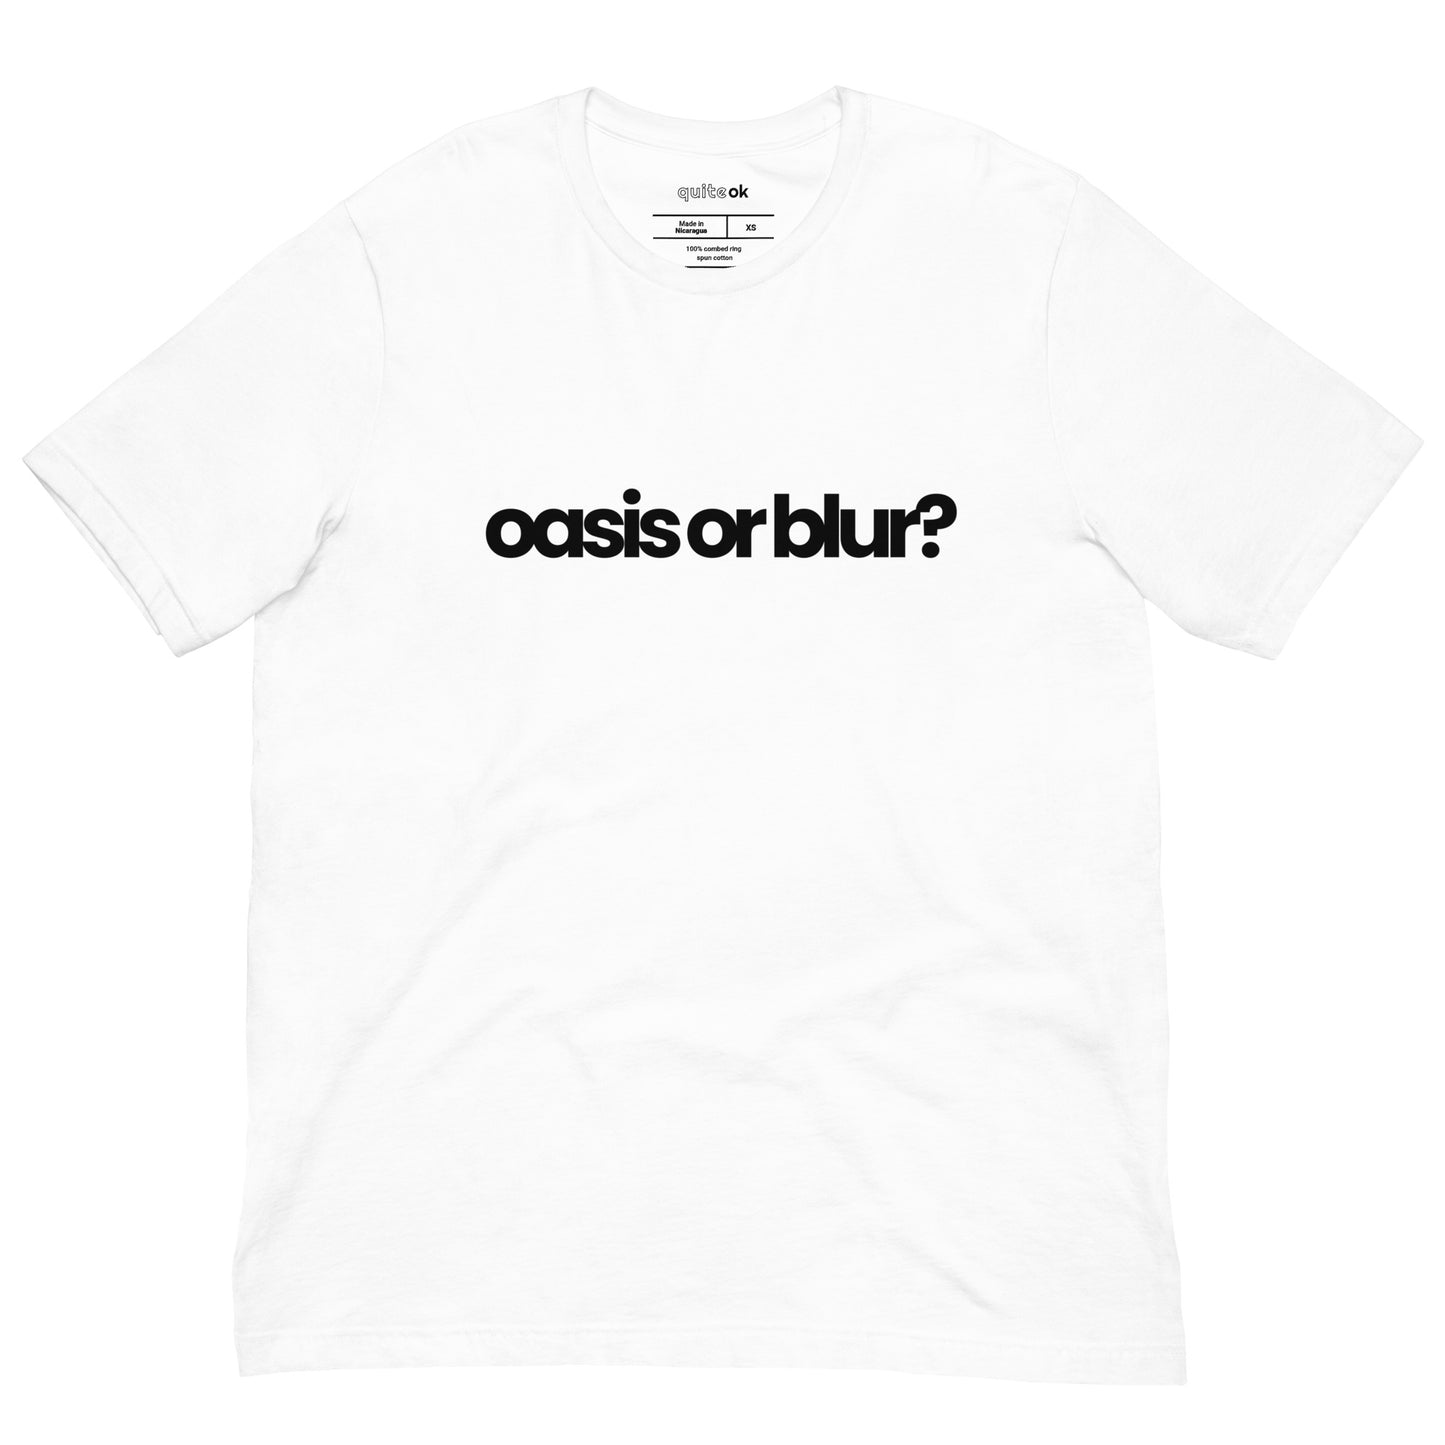 Oasis or Blur? Comedy Quote T-Shirt